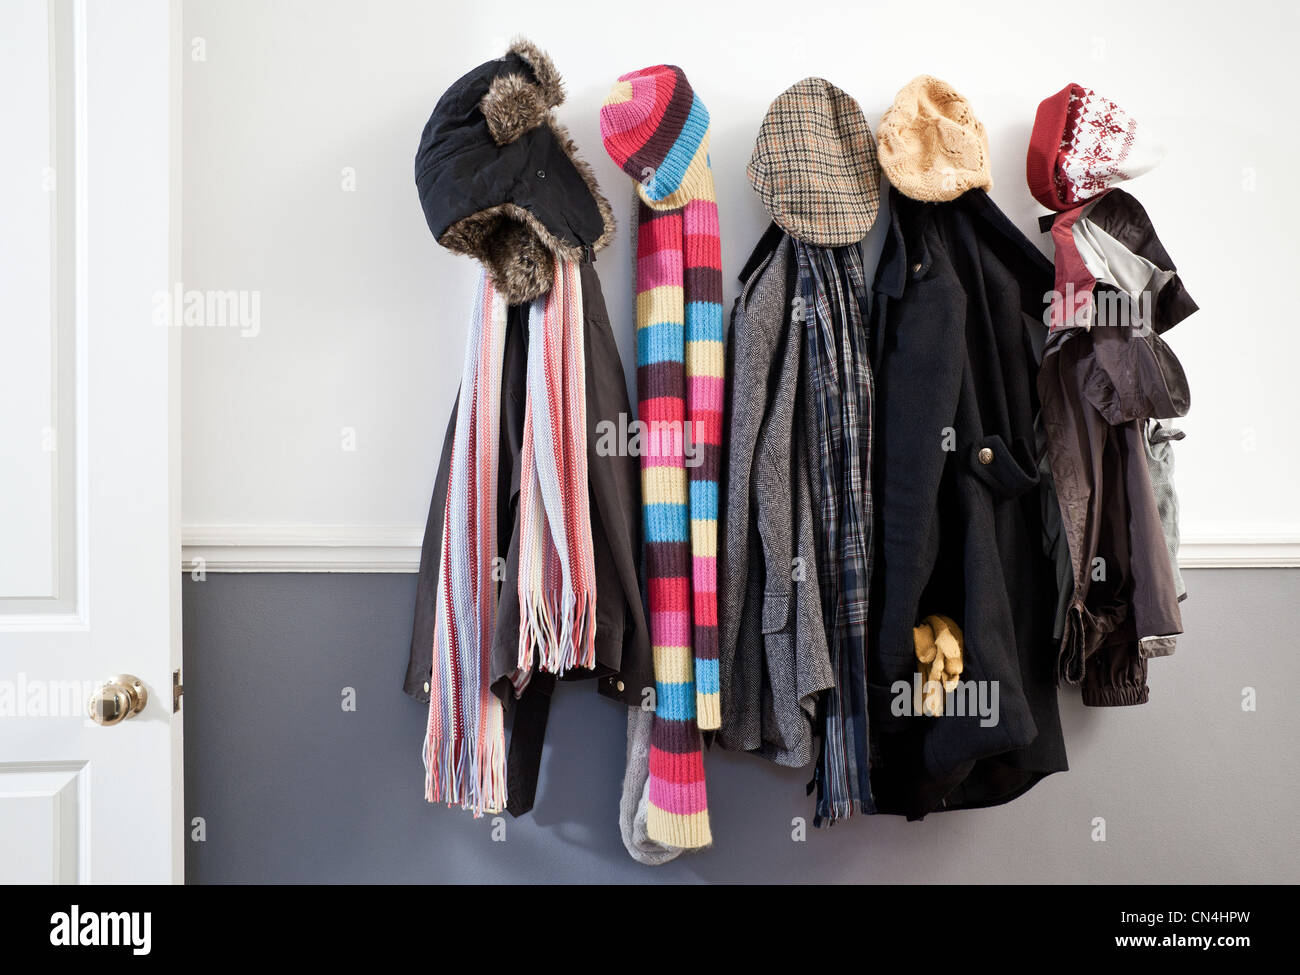 Coats and hats hanging on wall in hallway Stock Photo - Alamy